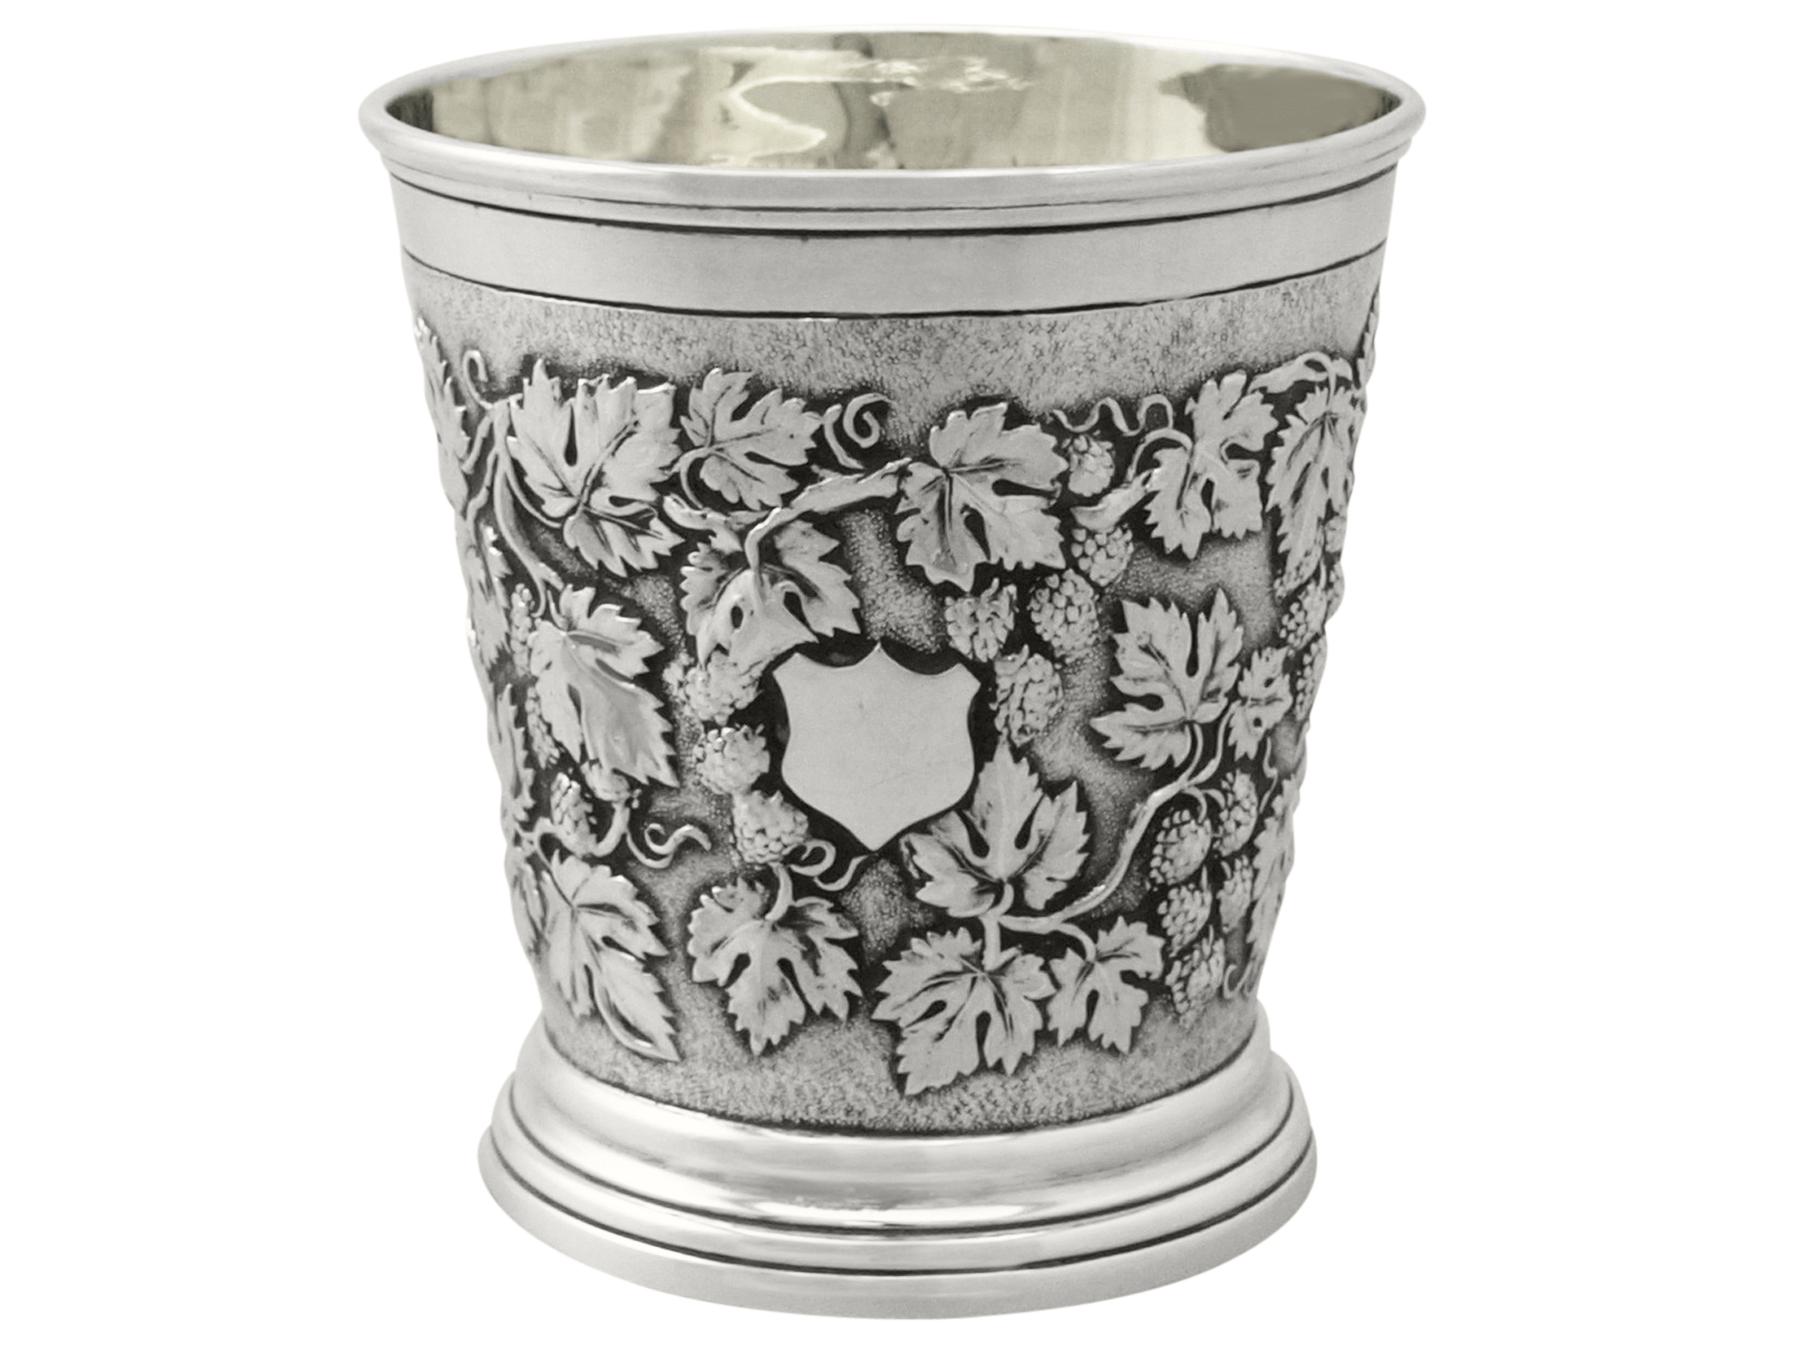 This fine antique sterling silver christening mug has a cylindrical tapering form onto a plain spreading collet style foot.

The body of this Victorian mug is ornamented with a fine and impressive chased decorated grape and vine decoration on a